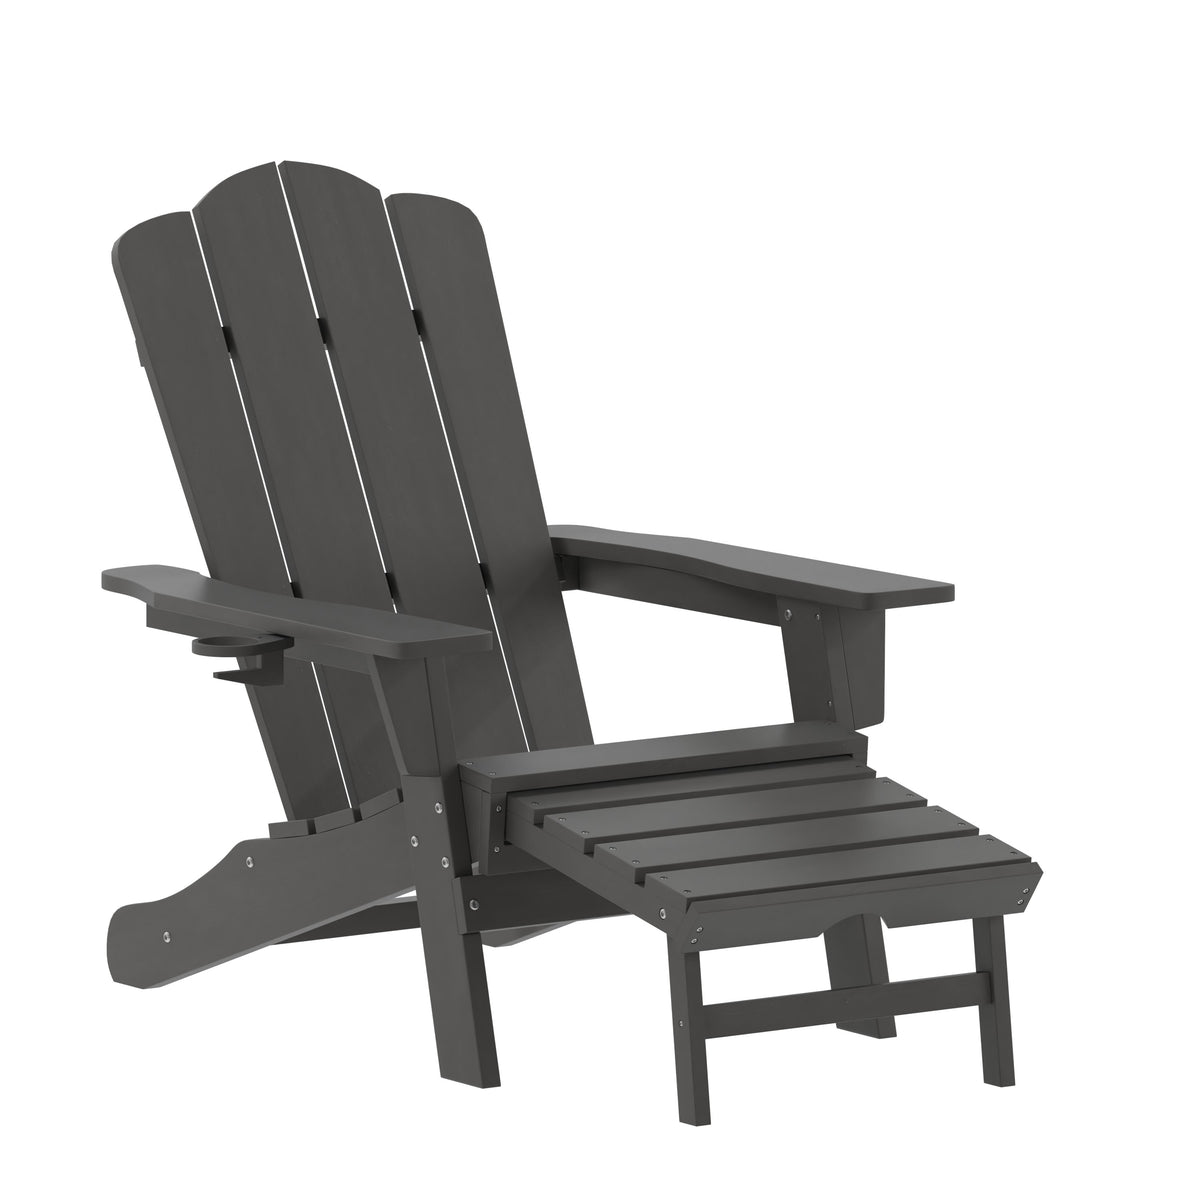 Gray |#| Commercial All-Weather Adirondack Chair with Pullout Ottoman & Cupholder - Gray